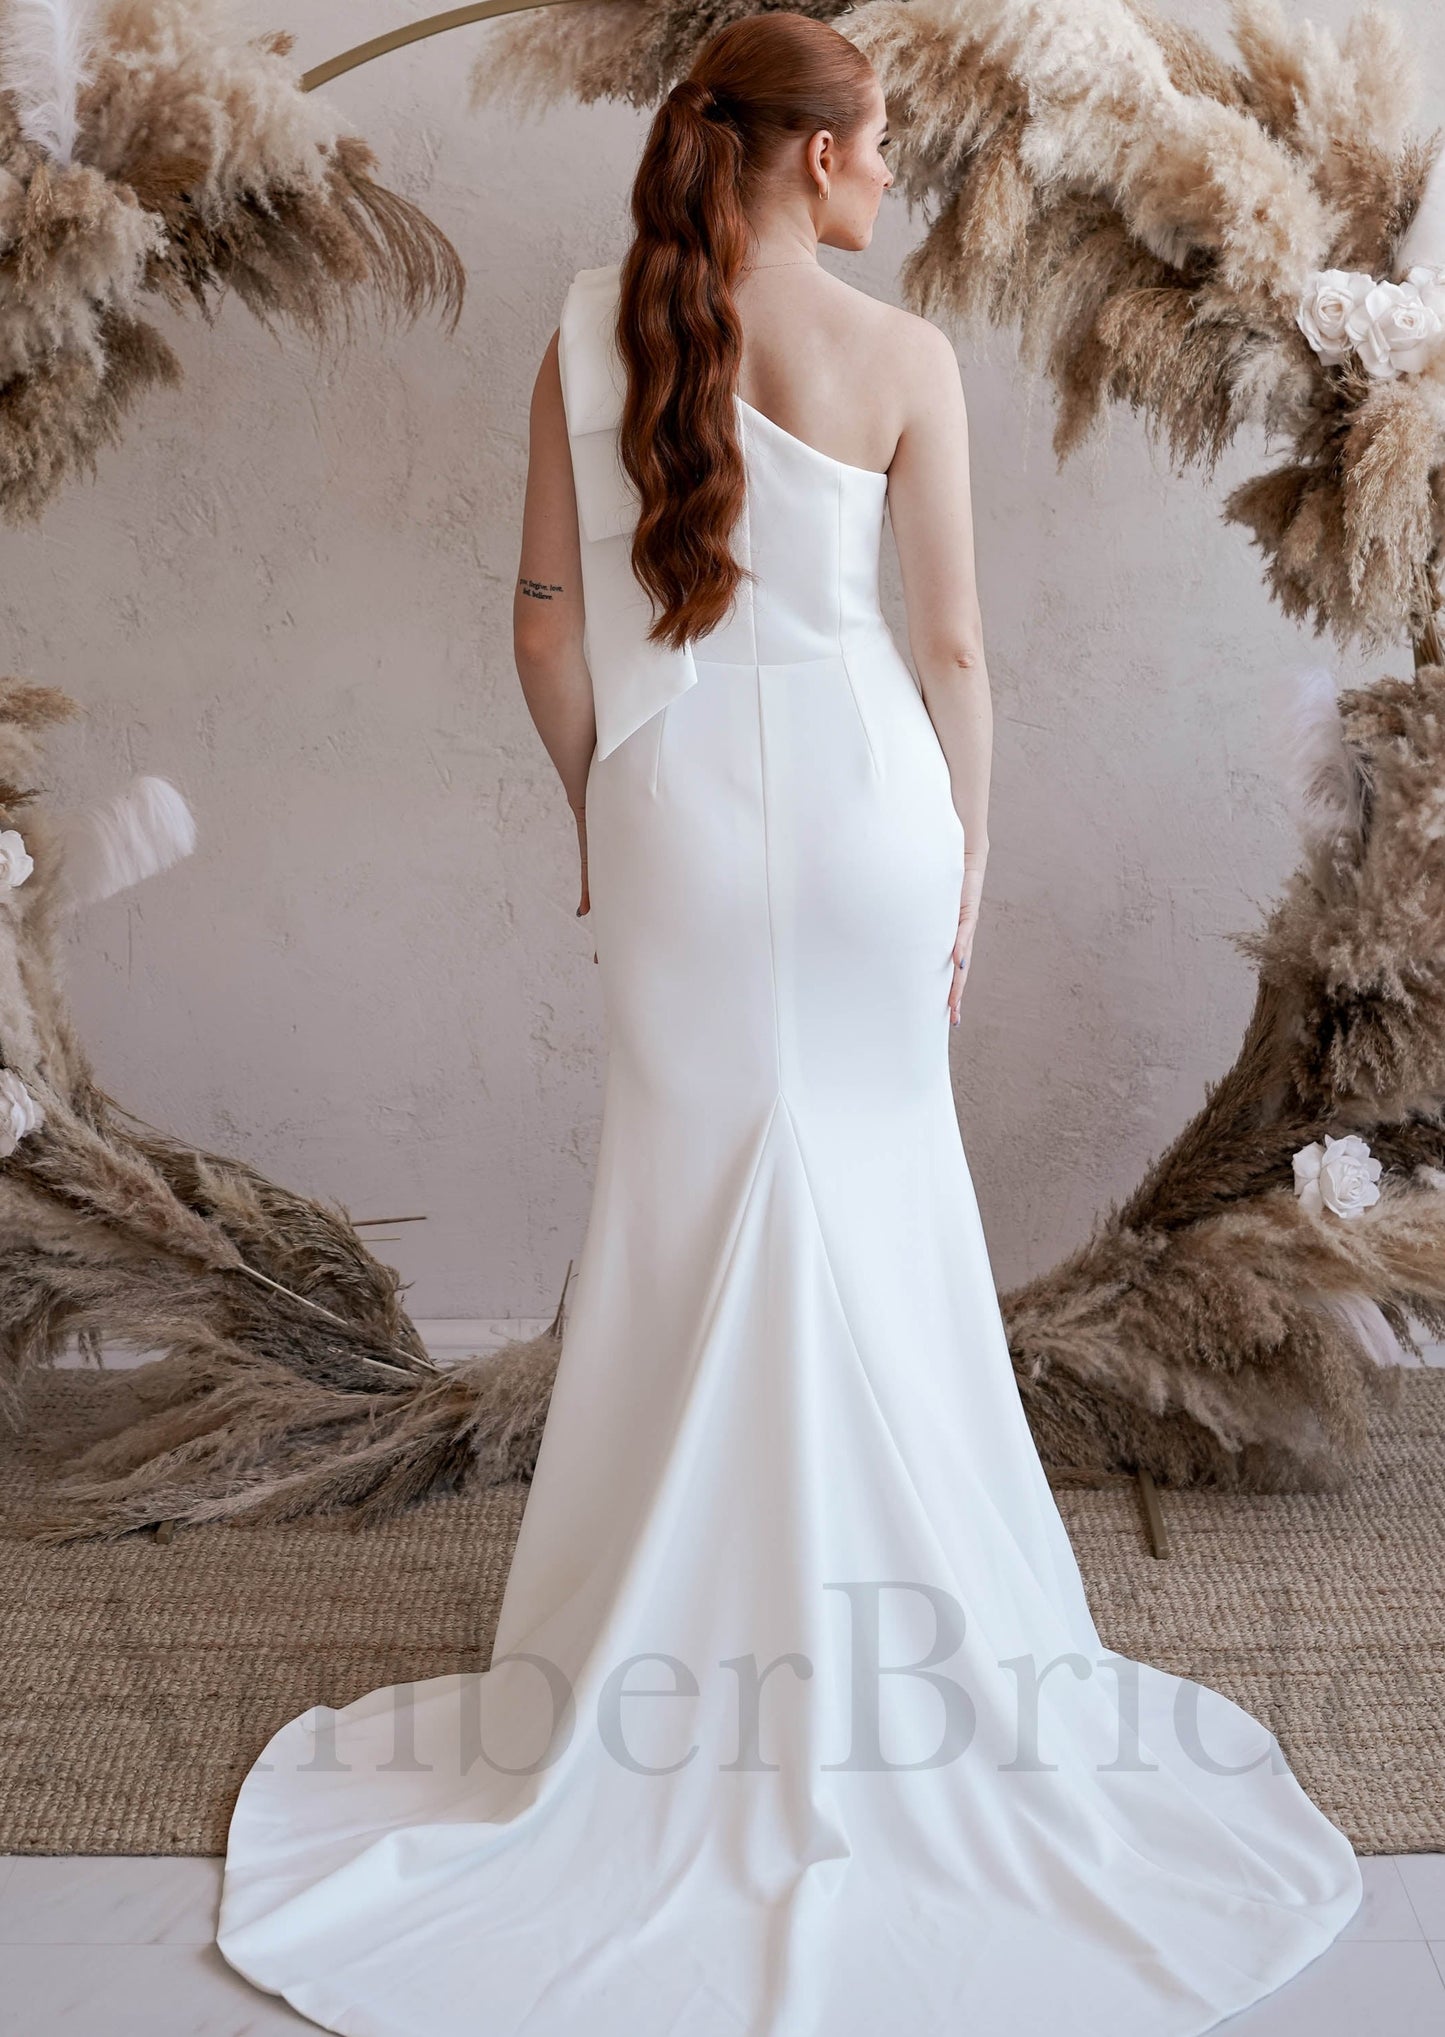 Unique Satin Mermaid Wedding Dress with One Shoulder Bow